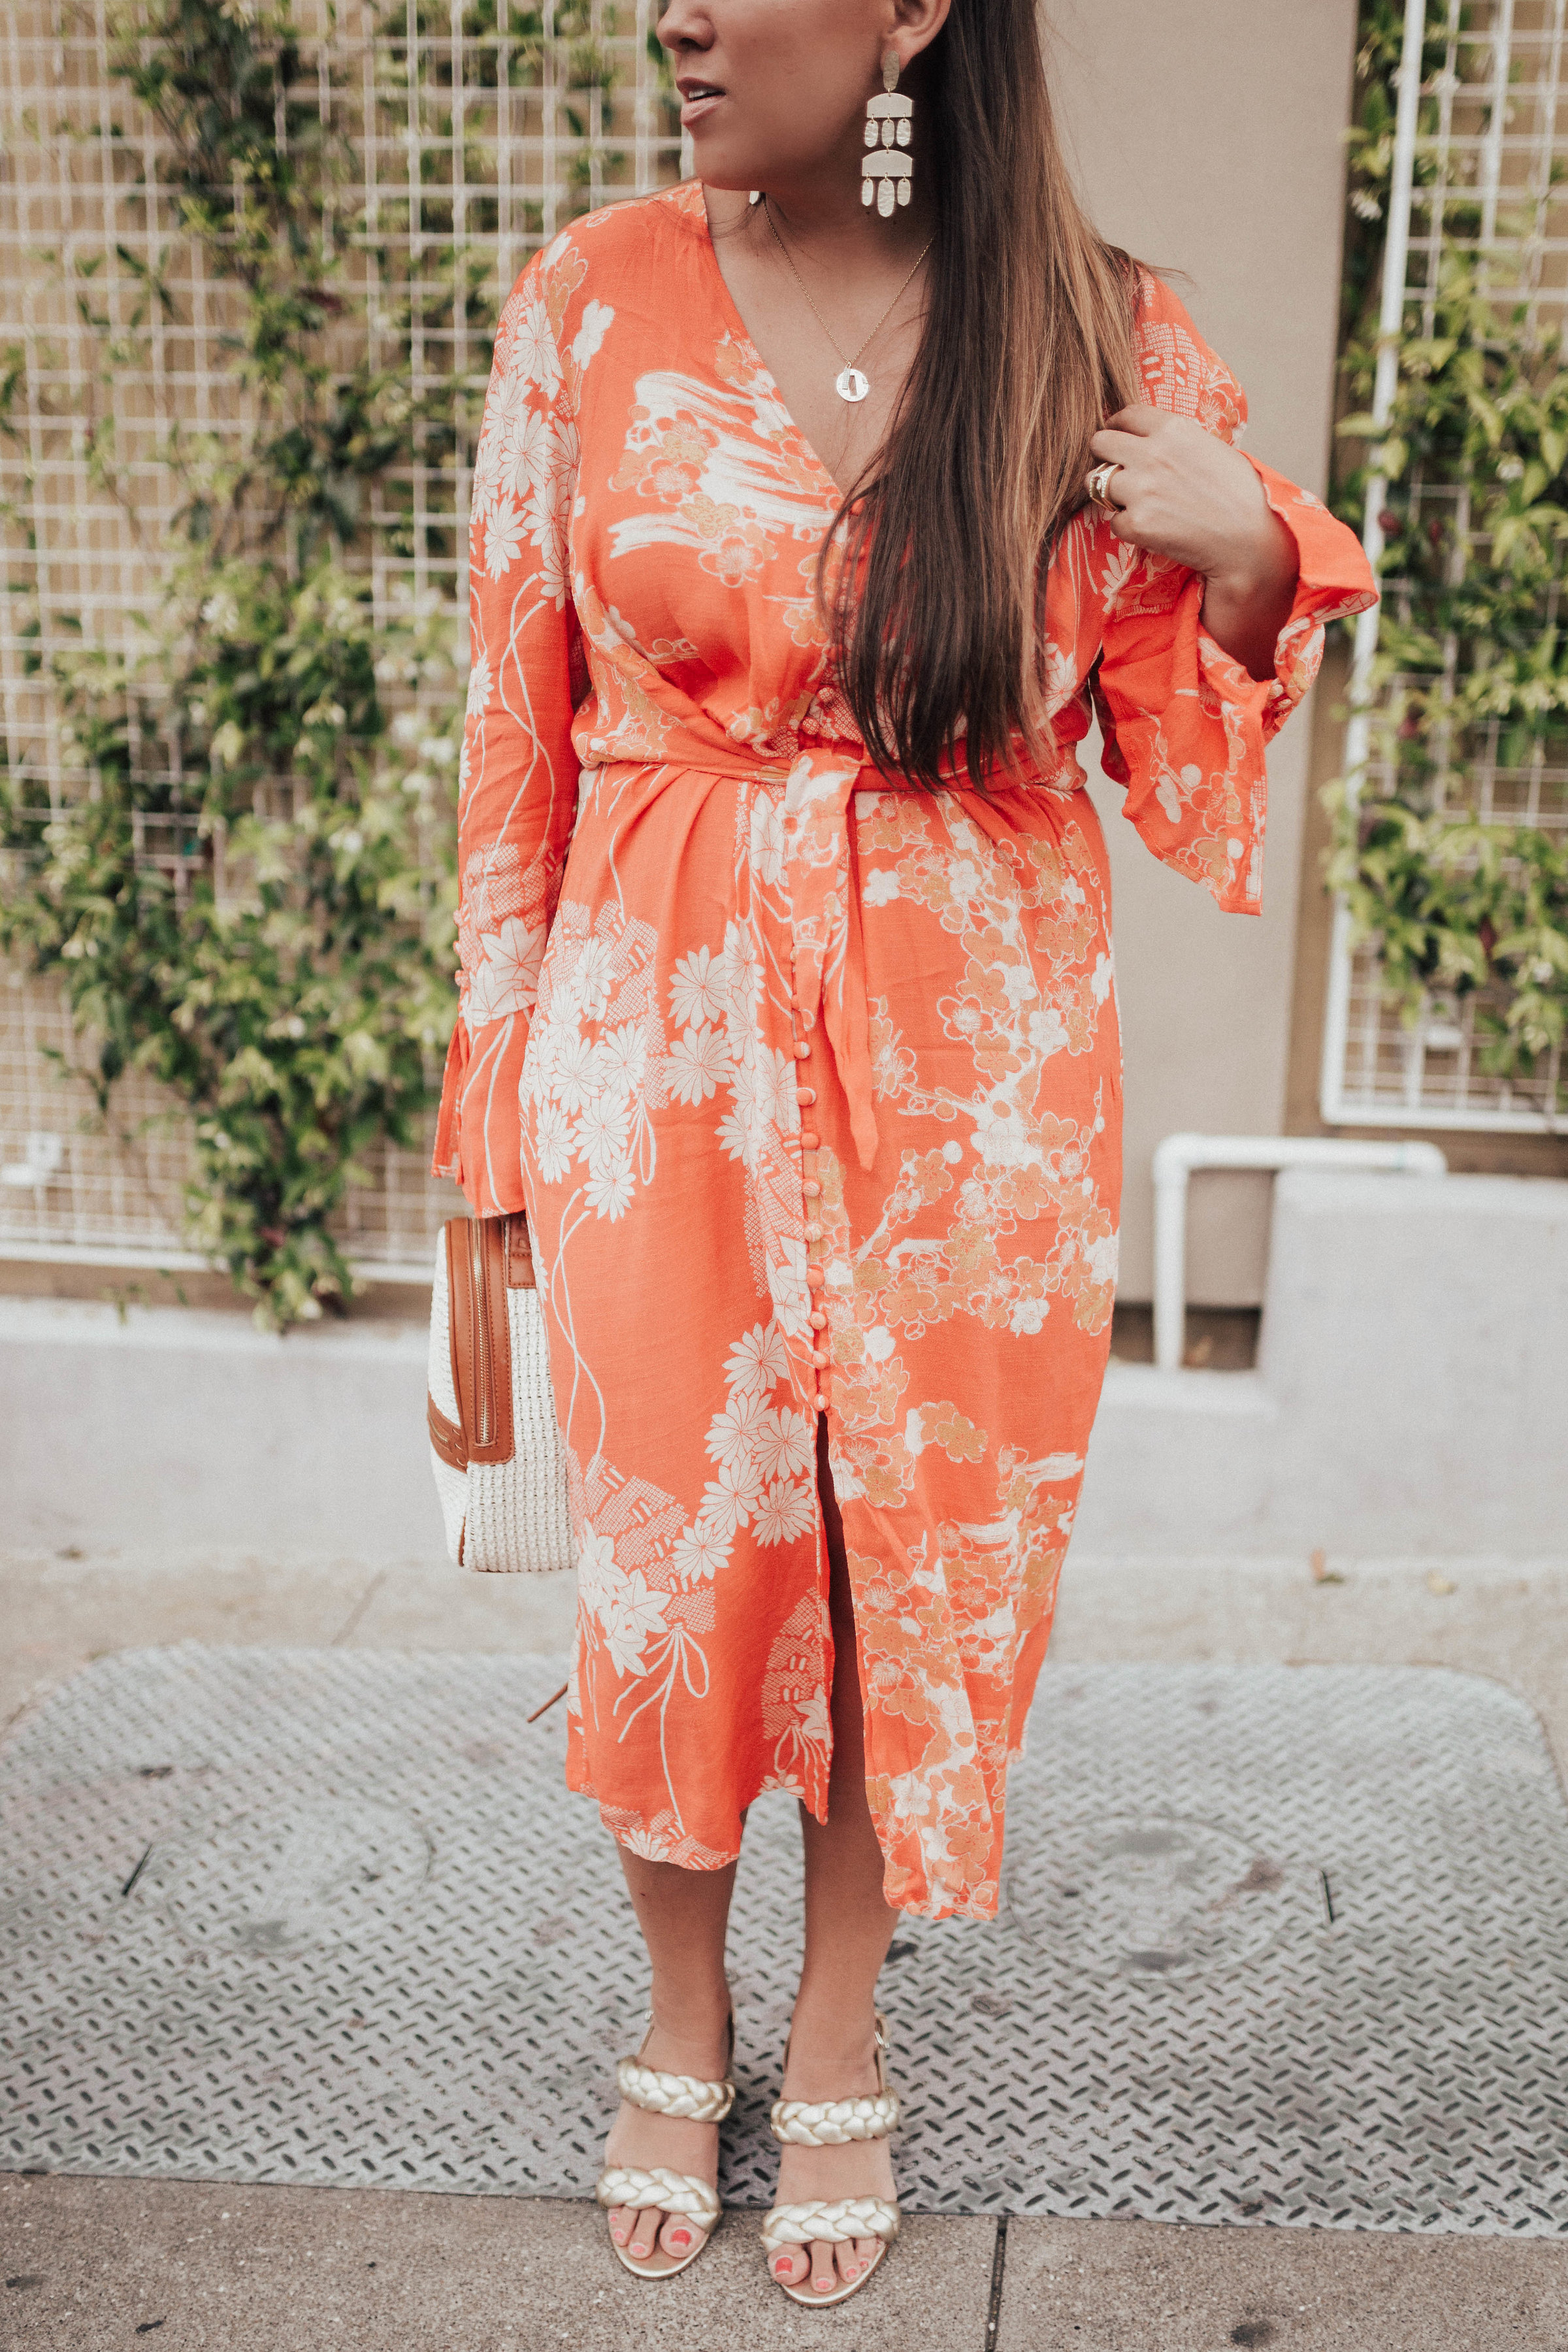 Ashley Zeal from Two Peas in a Prada shares a free people floral print midi dress on sale. 